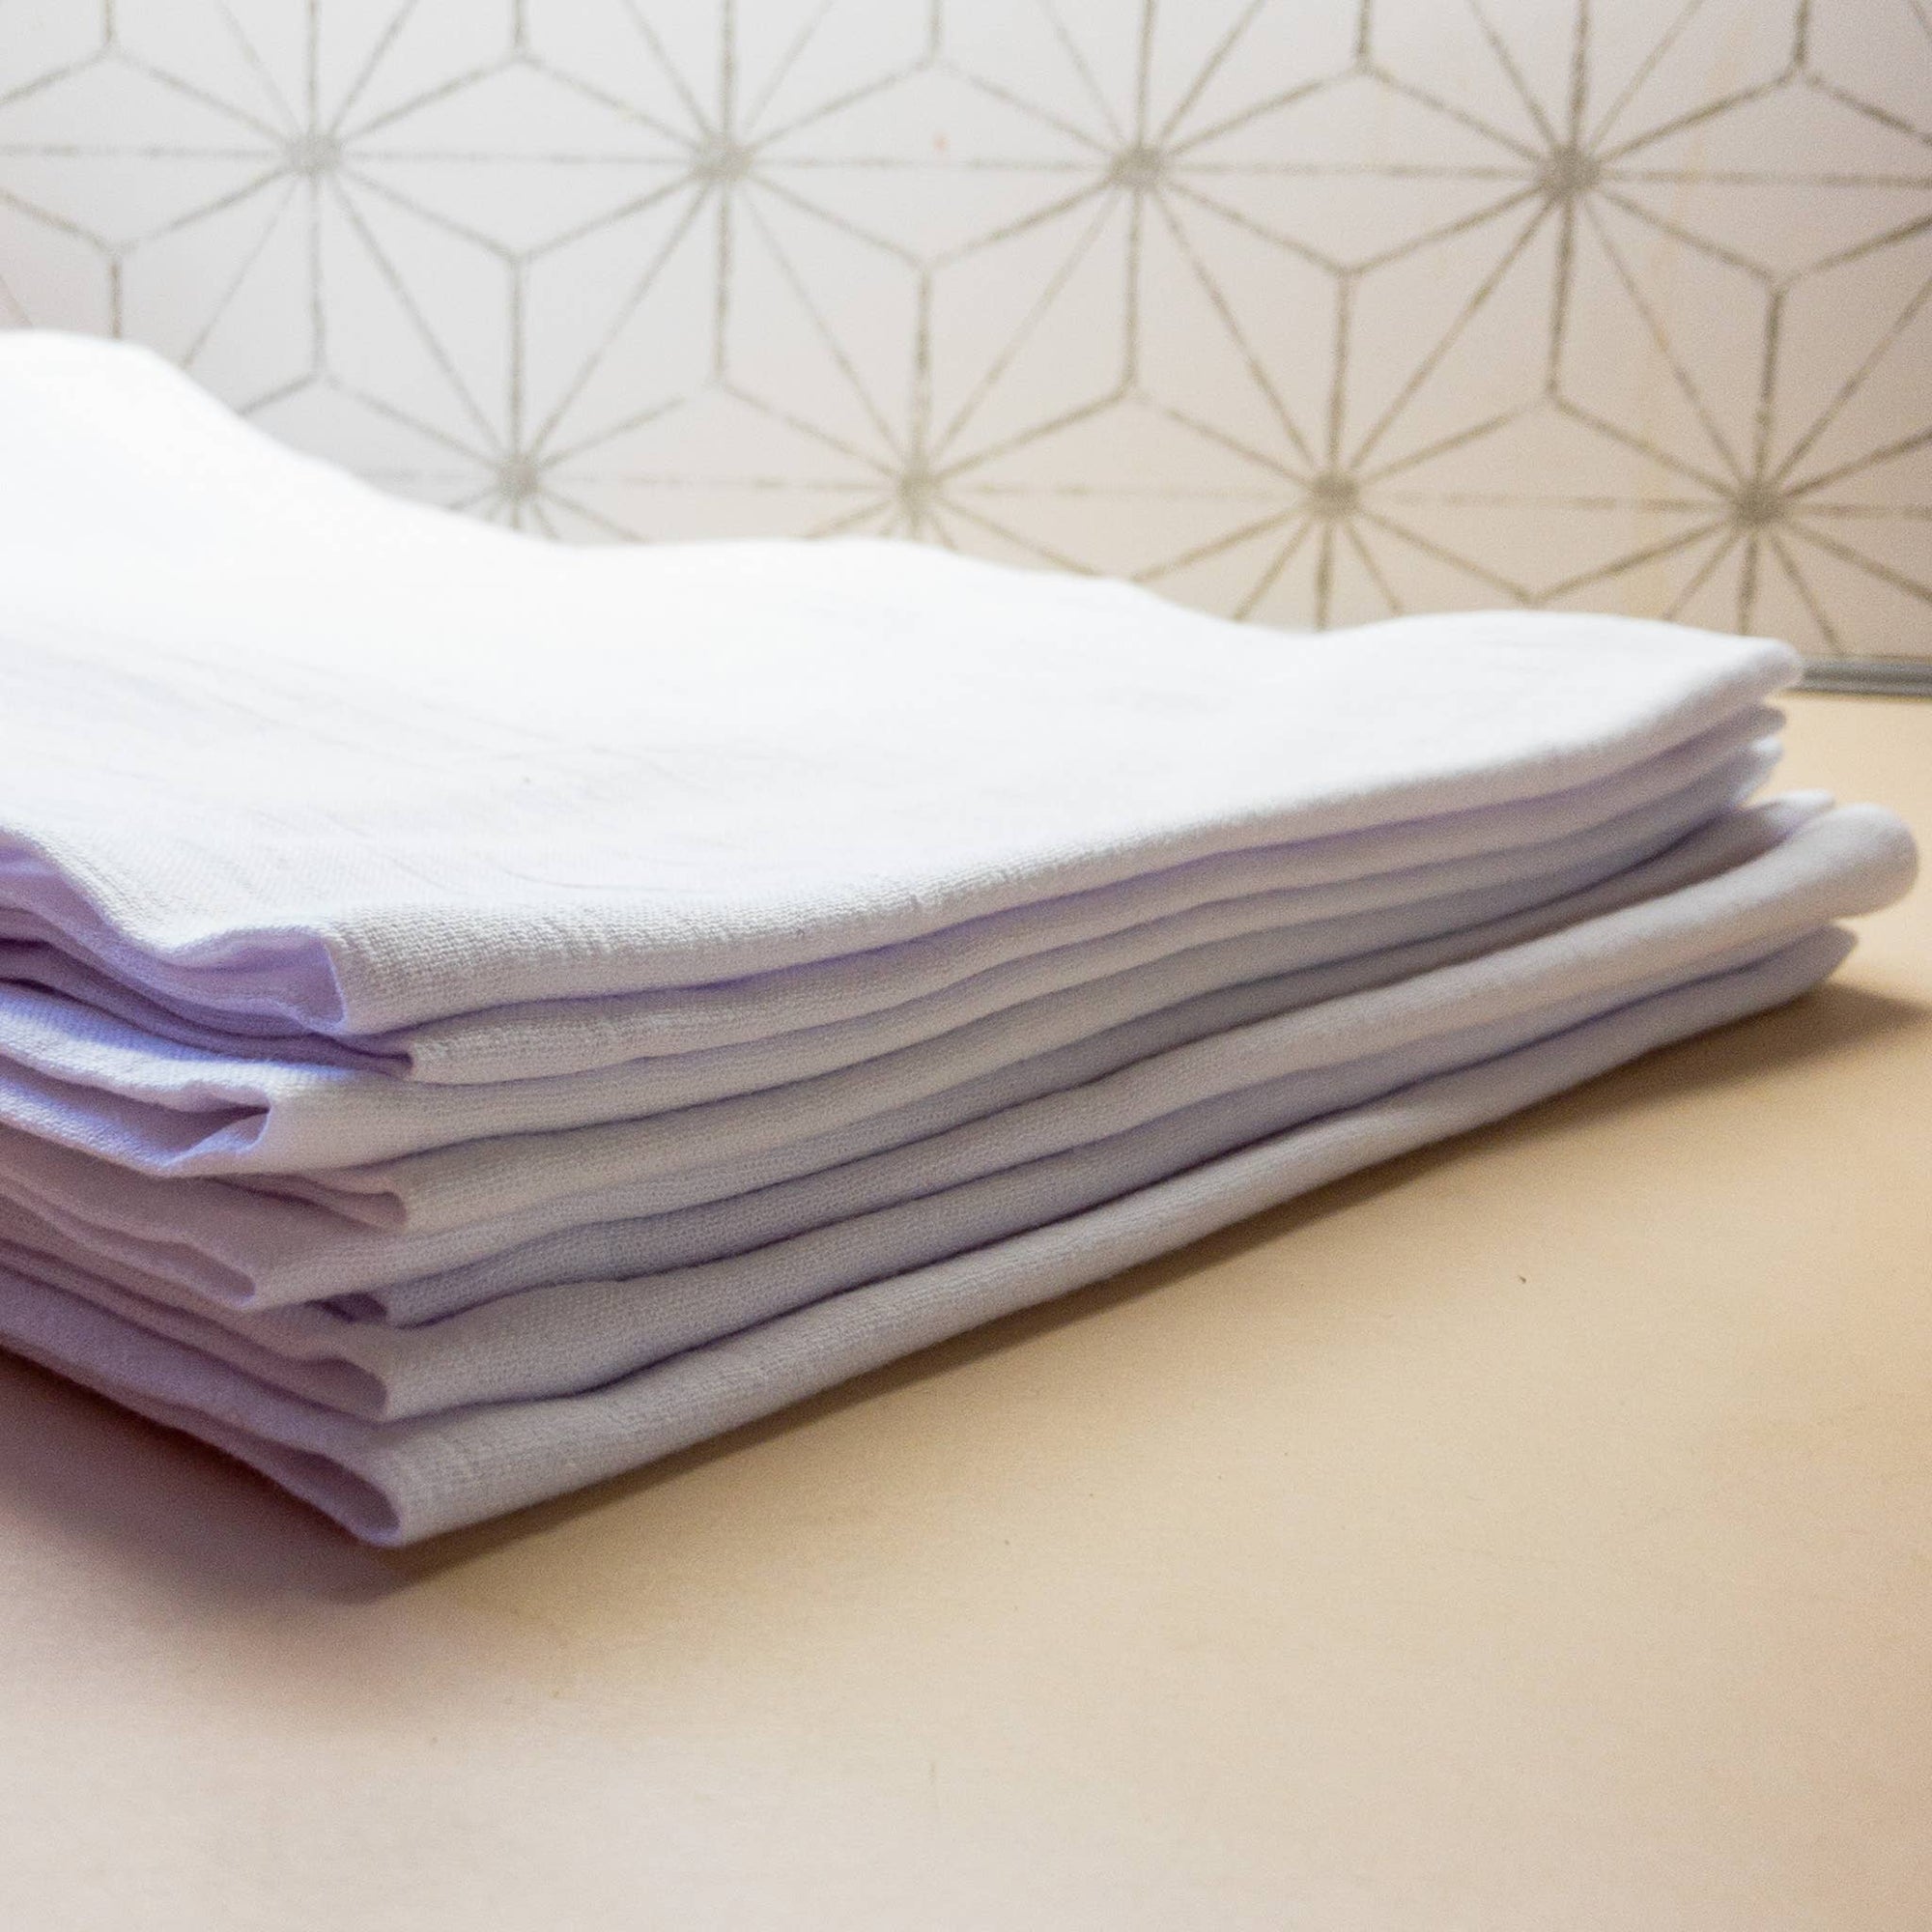 A stack of neatly folded white and light purple towels, including a Funny Chicken Tea Towel with heat transfer vinyl, on a countertop.